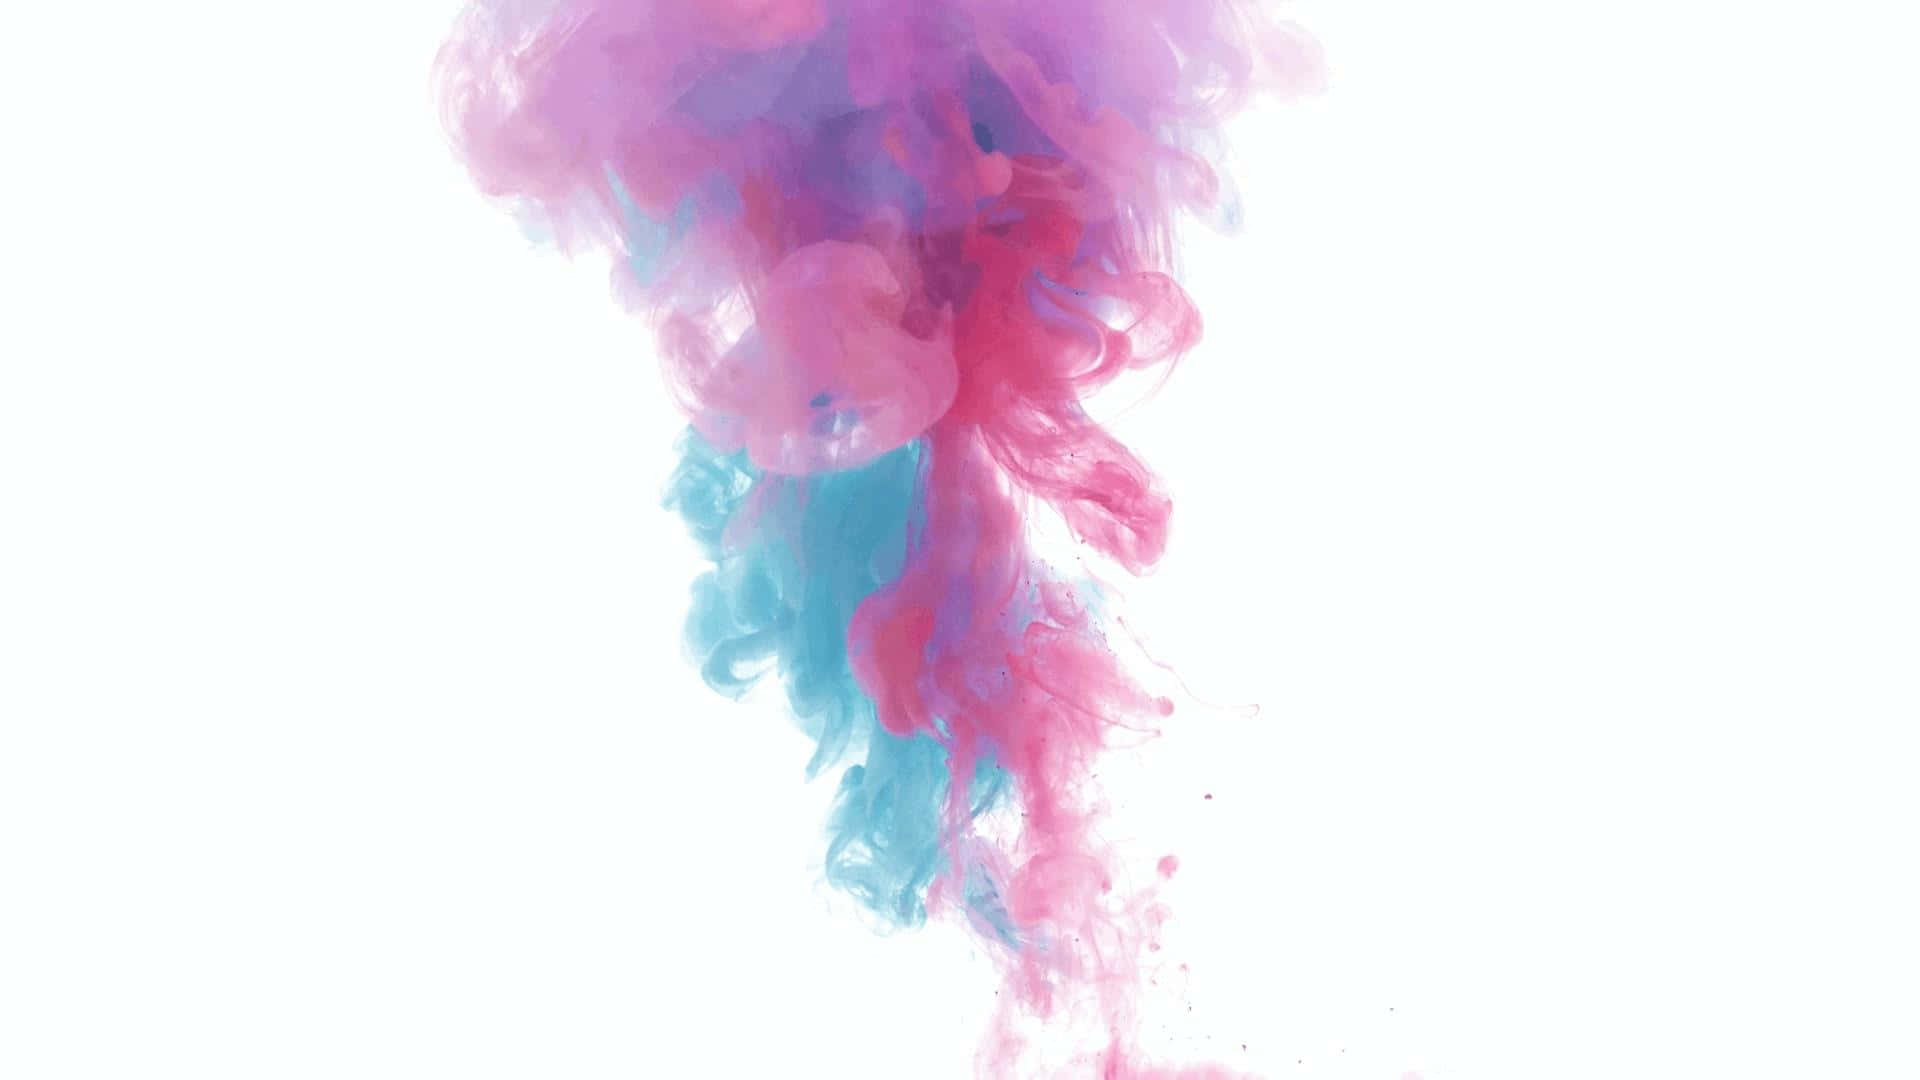 A colorful smoke background, featuring bright hues of blue and pink